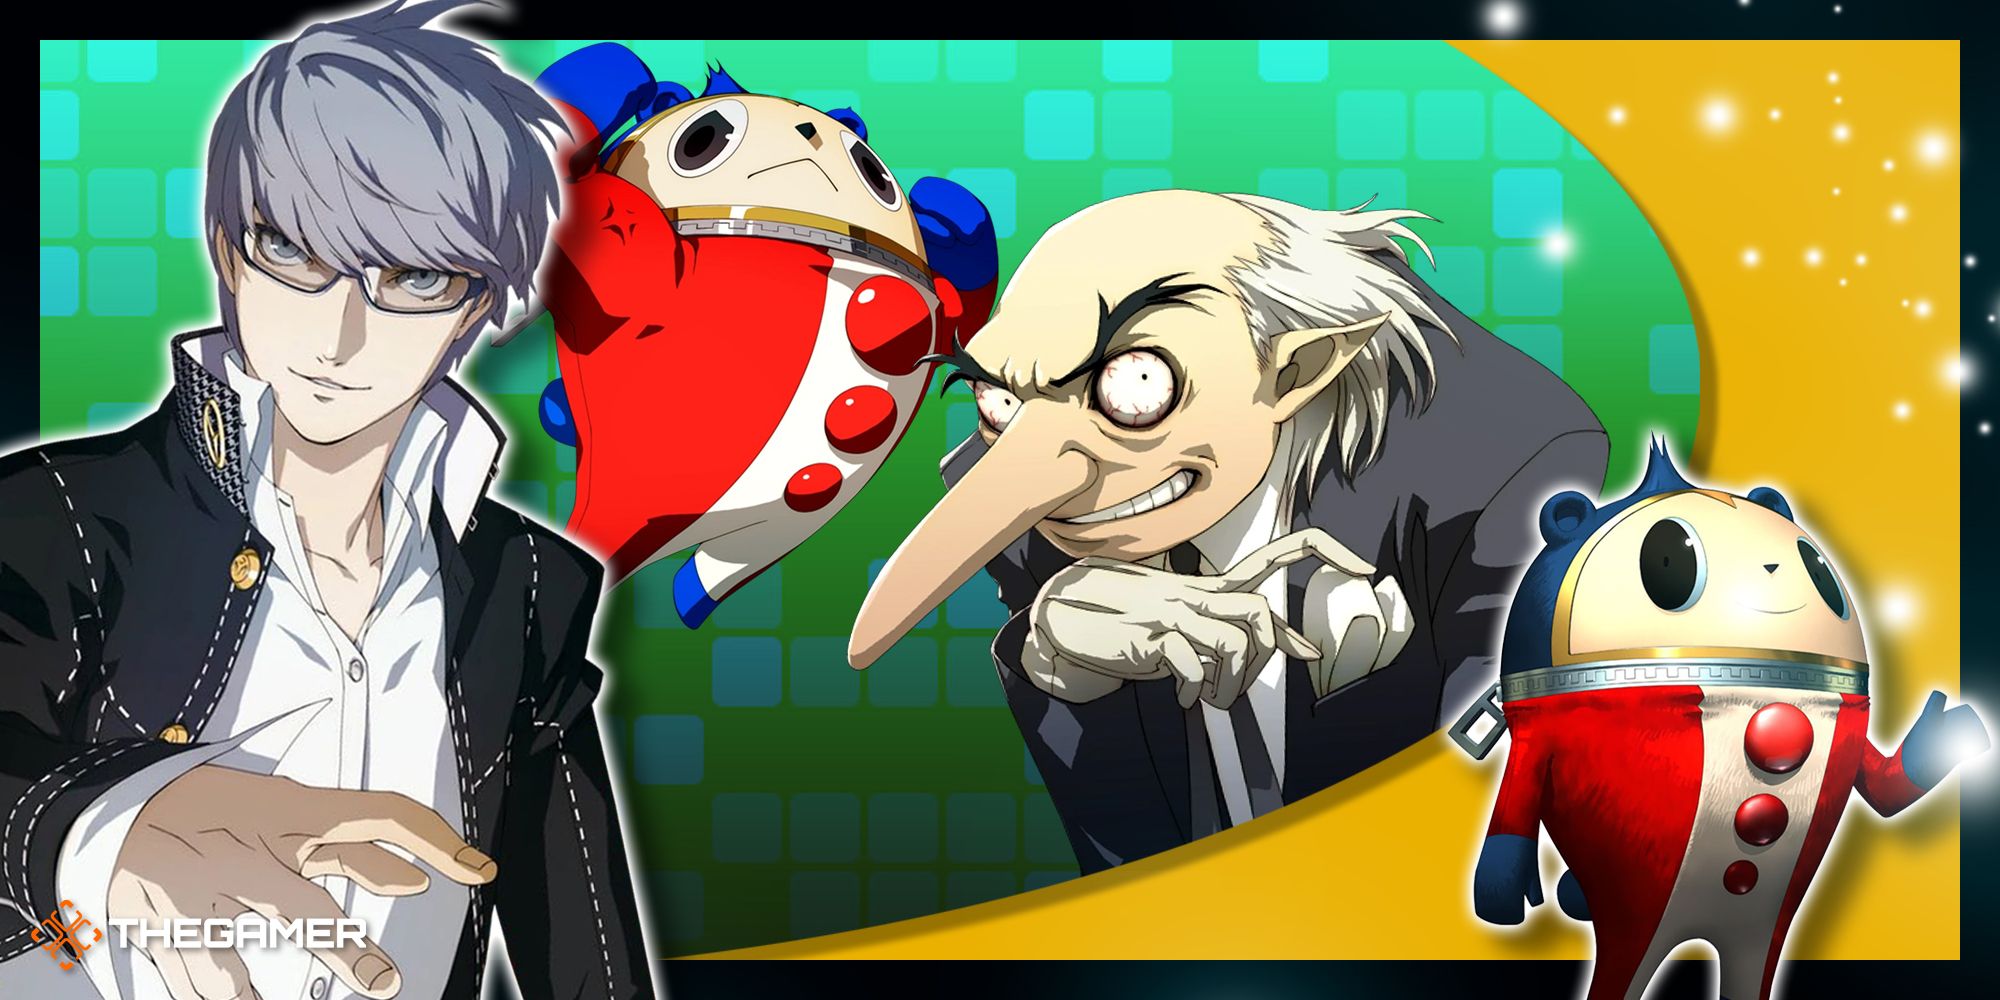 Persona 4 Golden - Collage of Yu, Teddie, and Igor.